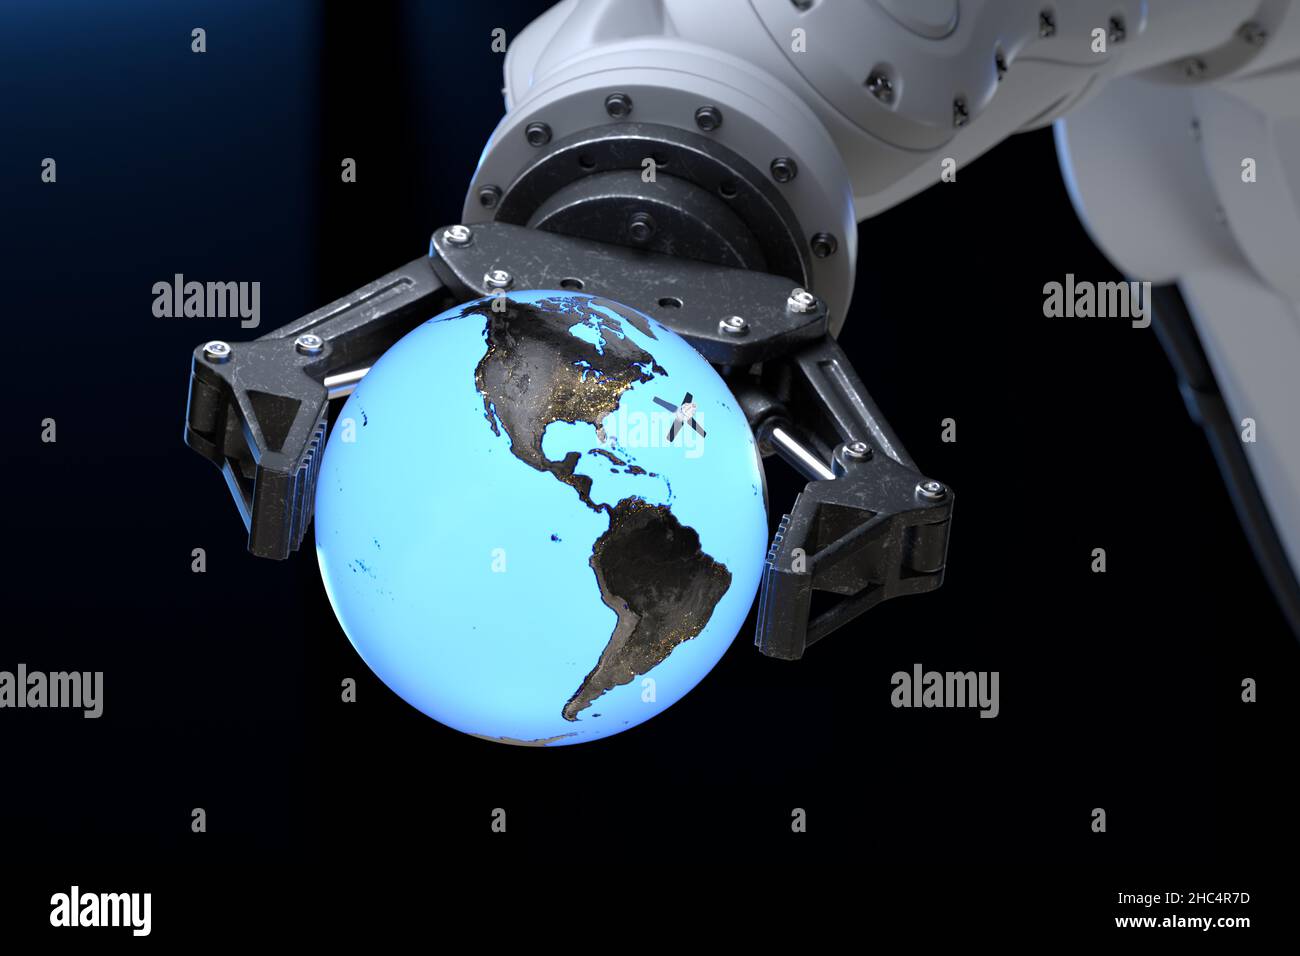 High Tech Robotic Arm Holding an Globe with orbiting satellite in its Grip. 3d illustration Stock Photo